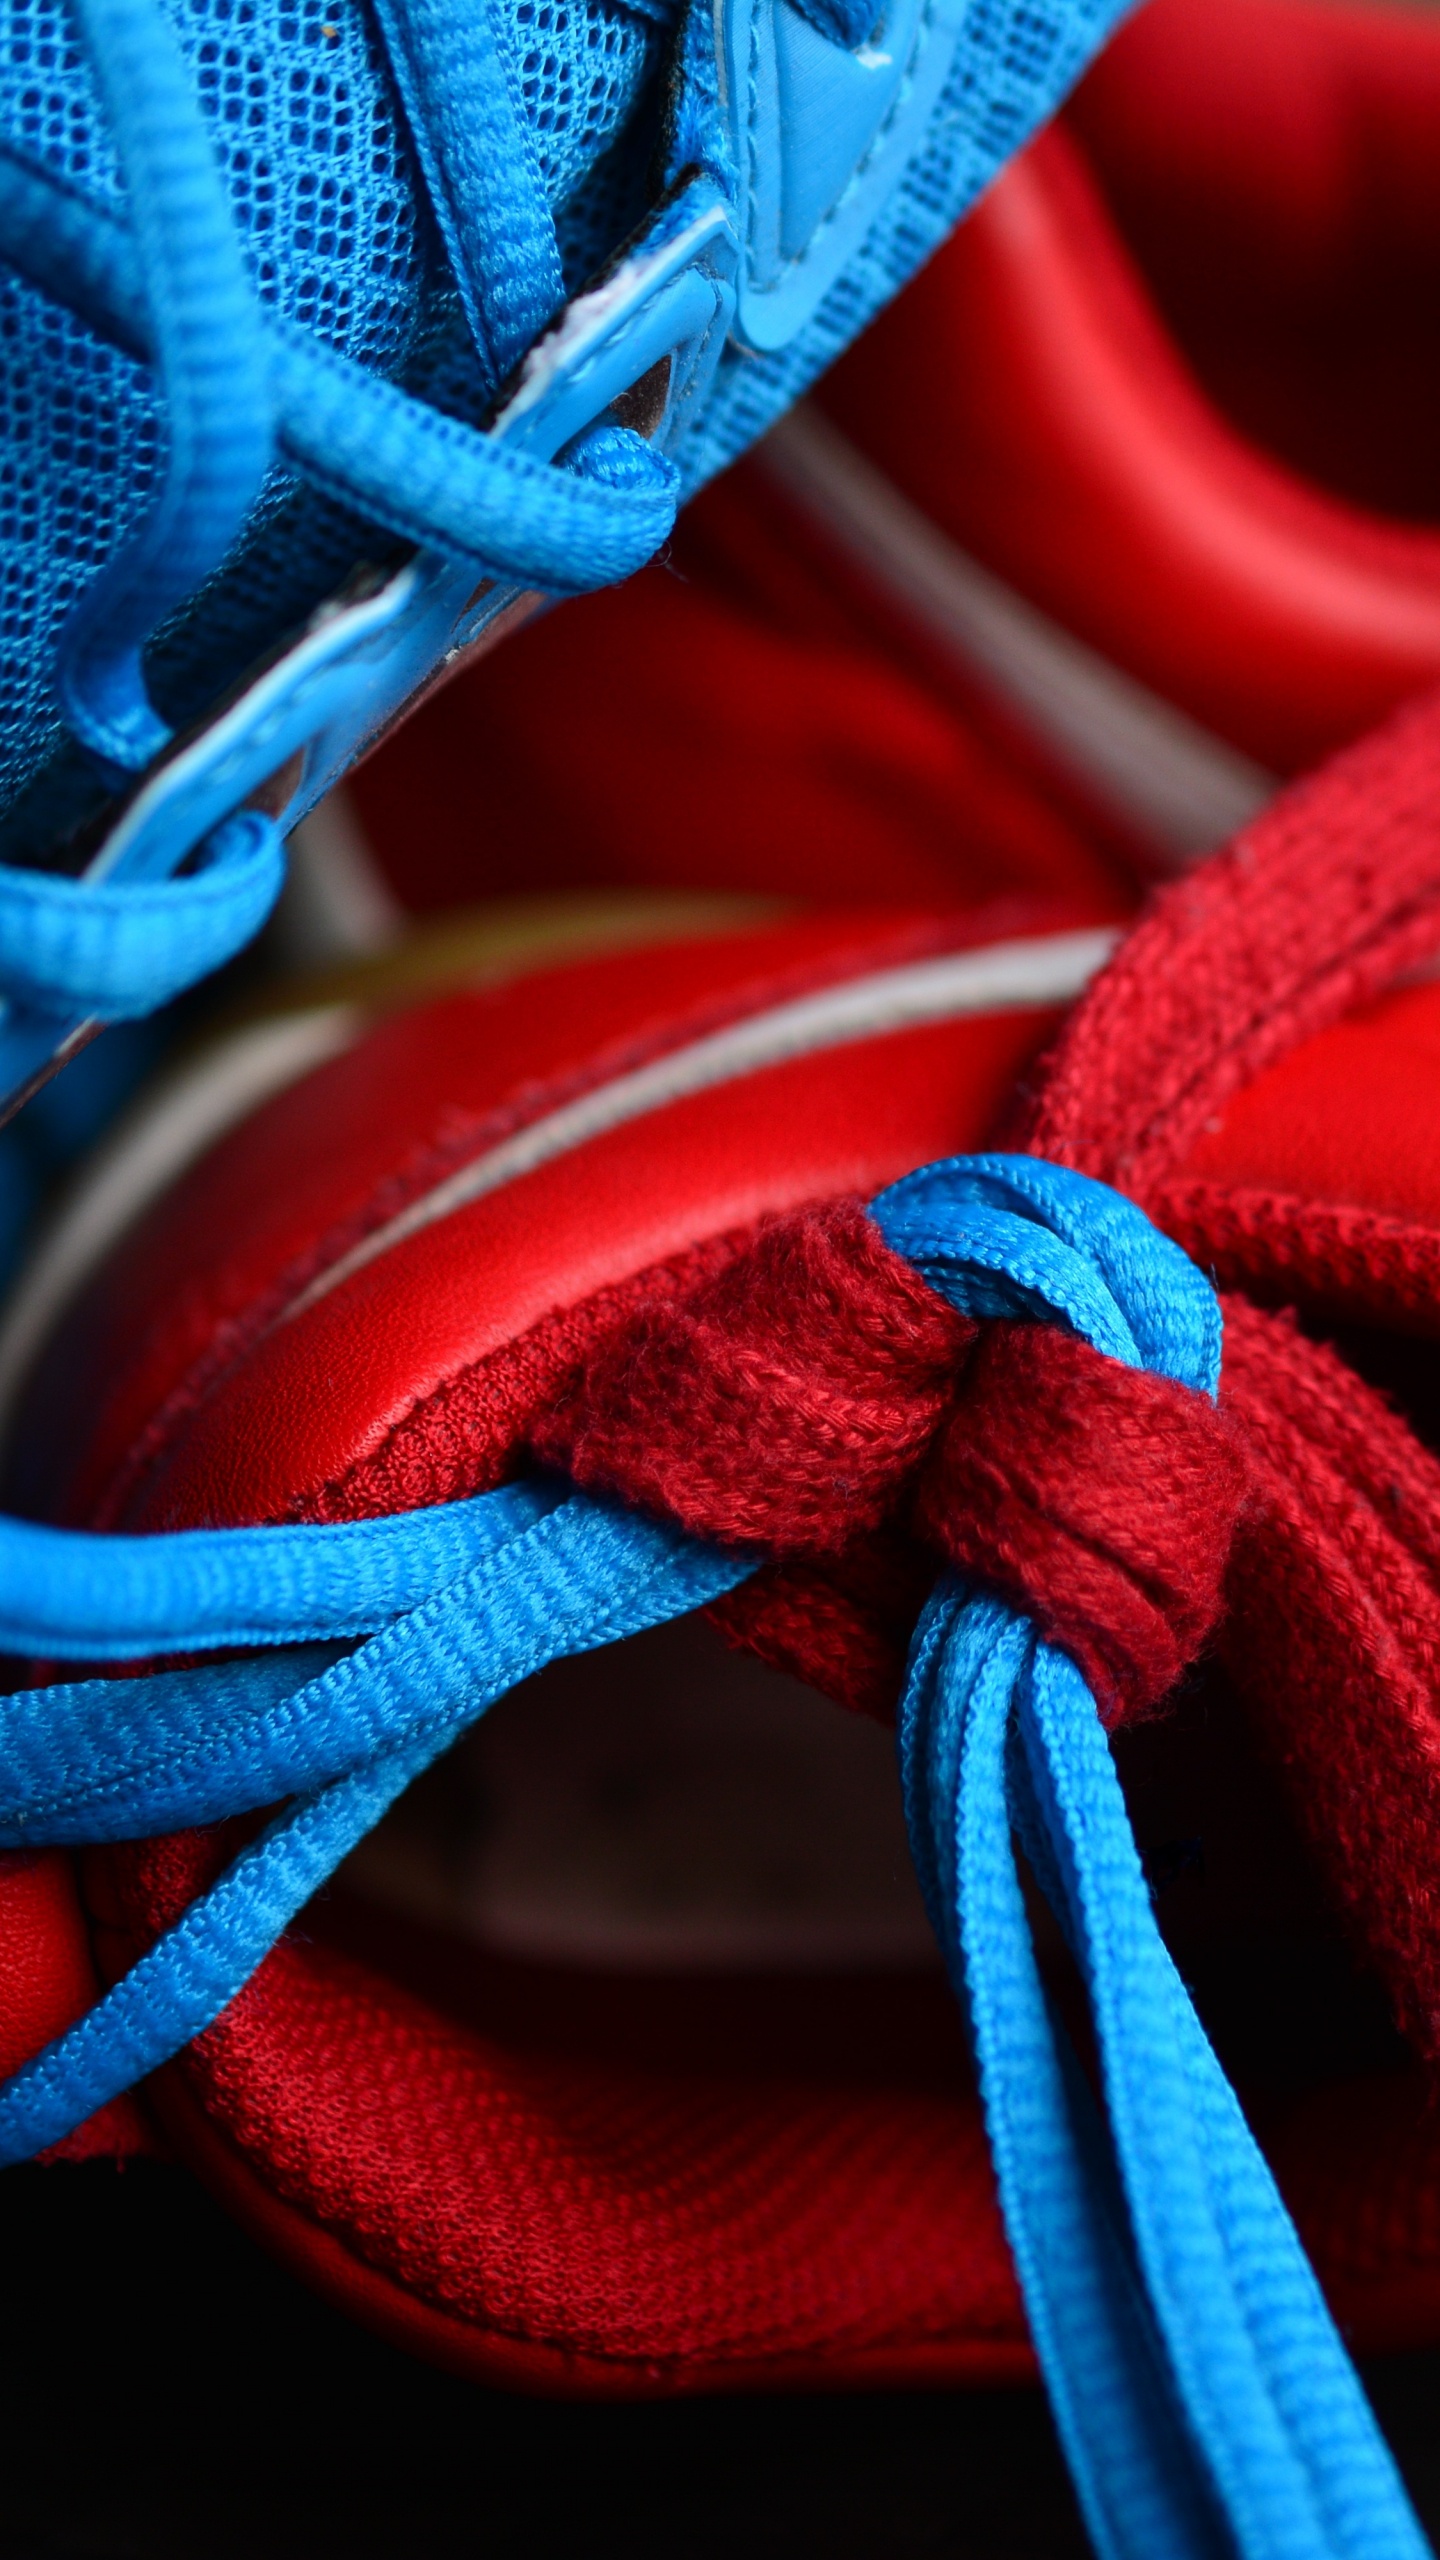 Red and Blue Lace up Shoes. Wallpaper in 1440x2560 Resolution